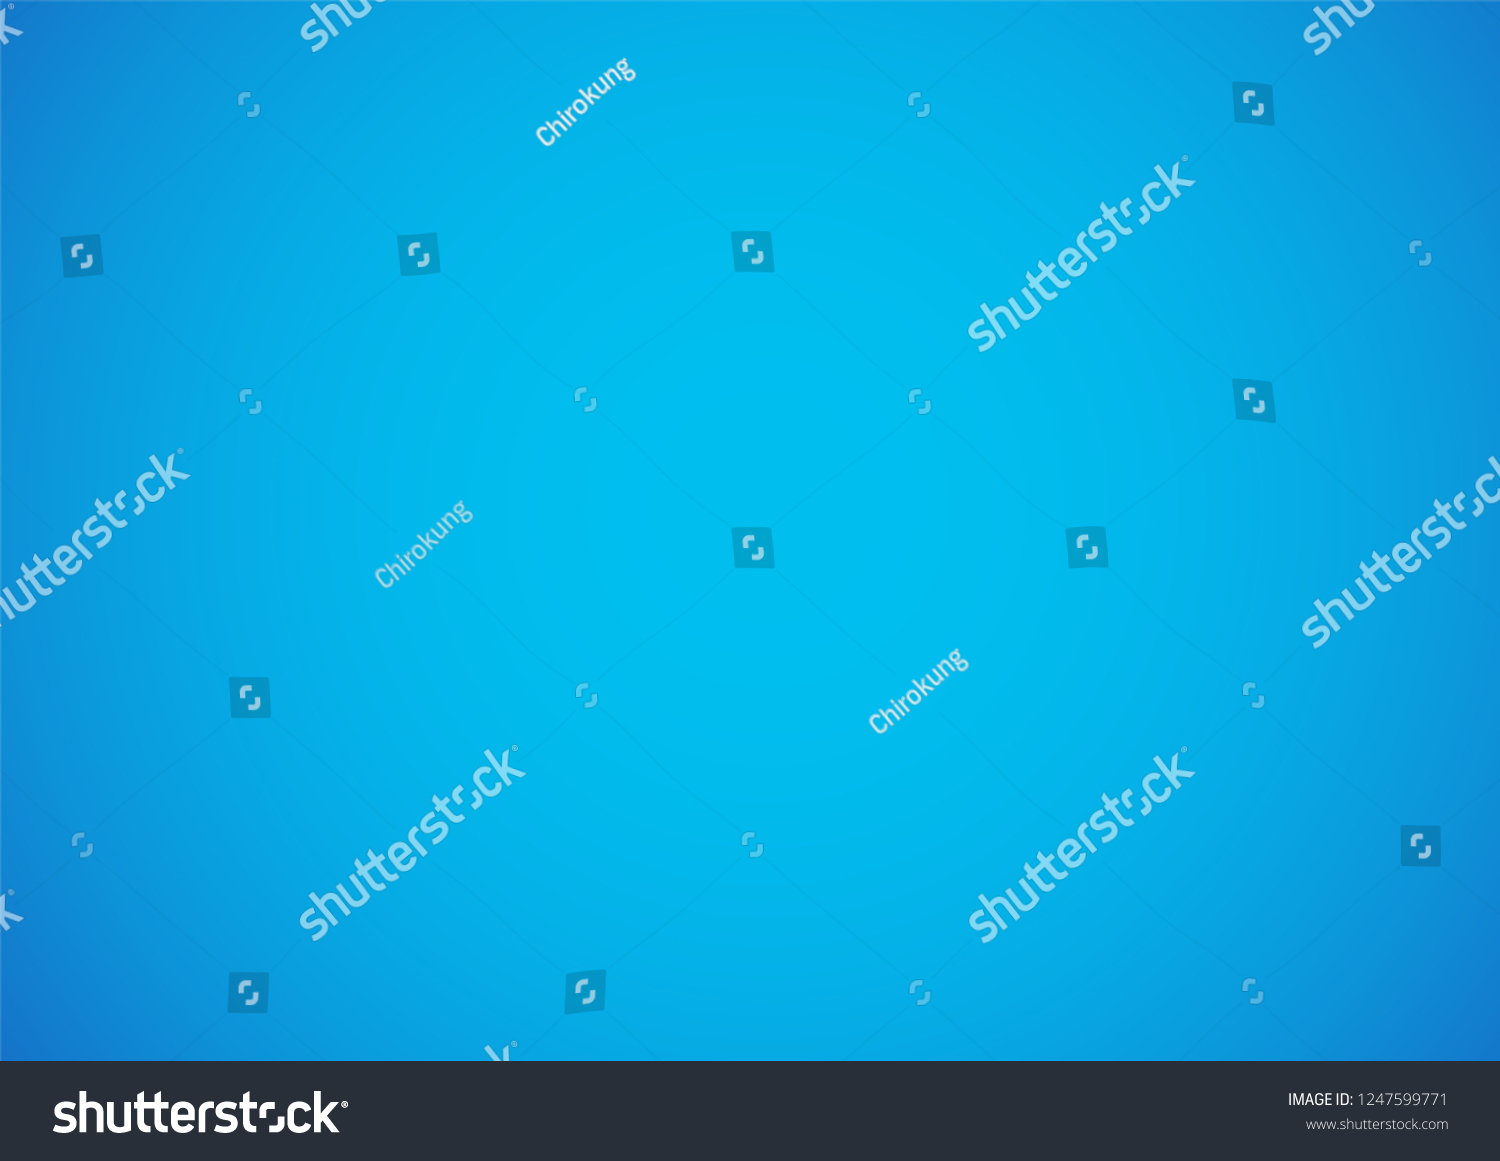 Blue Gradient abstract background #1247599771